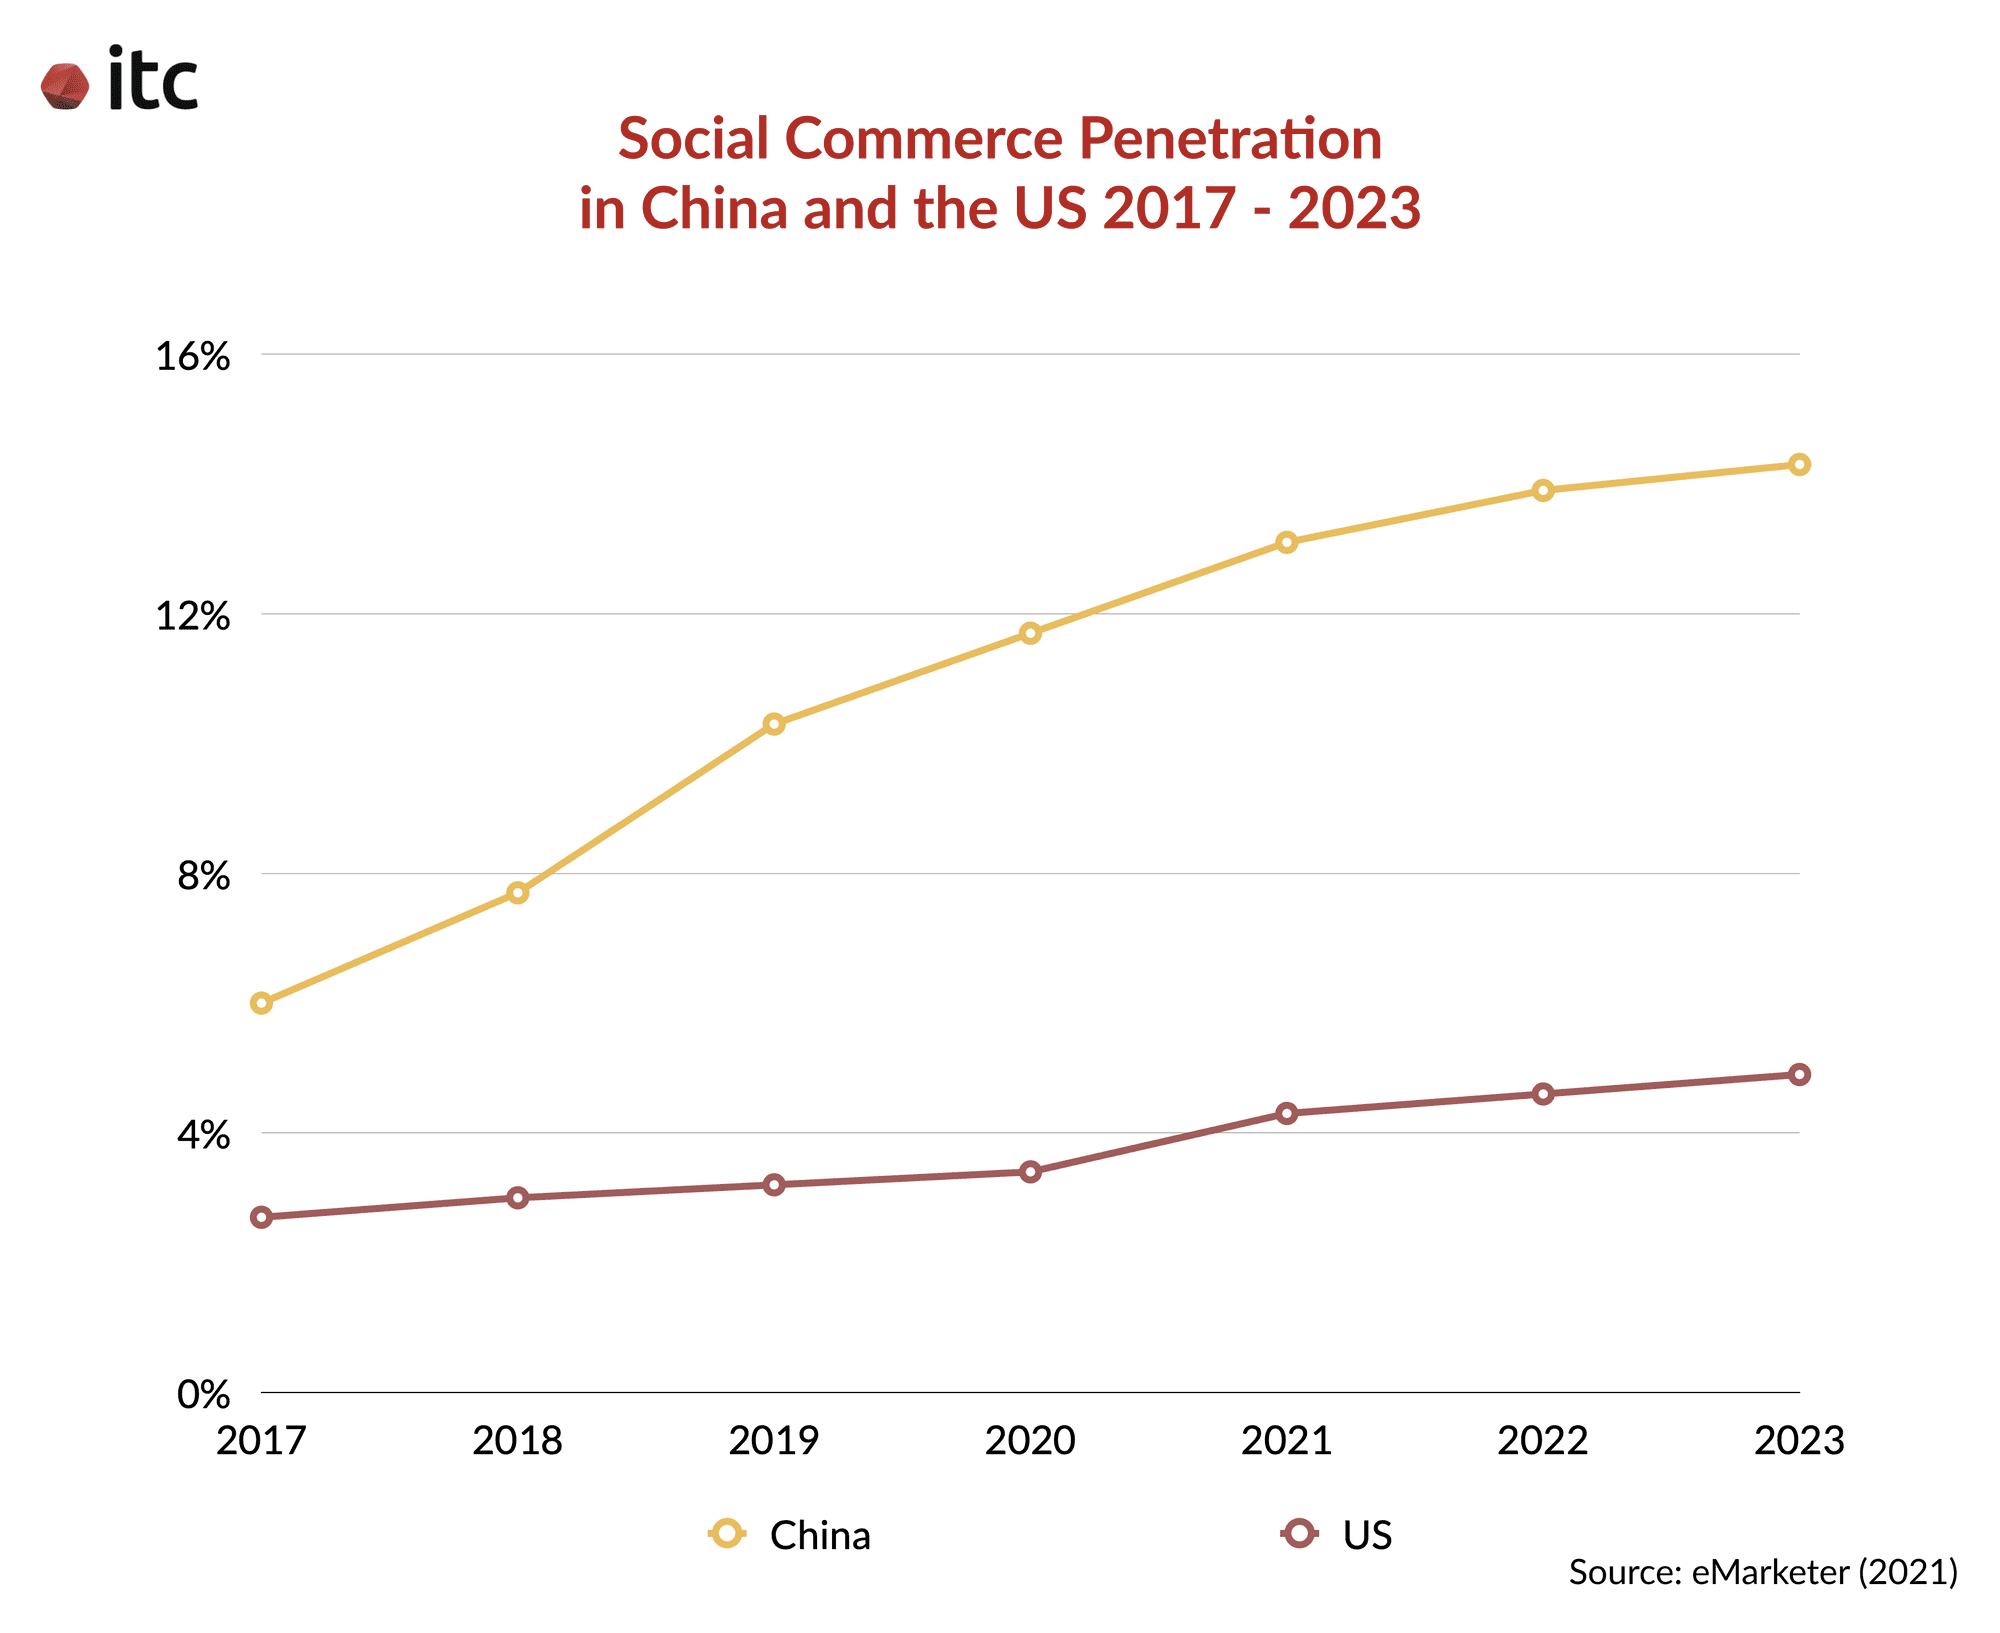 A chart illustrating the social commerce penetration in China and the US from 2017 to 2023